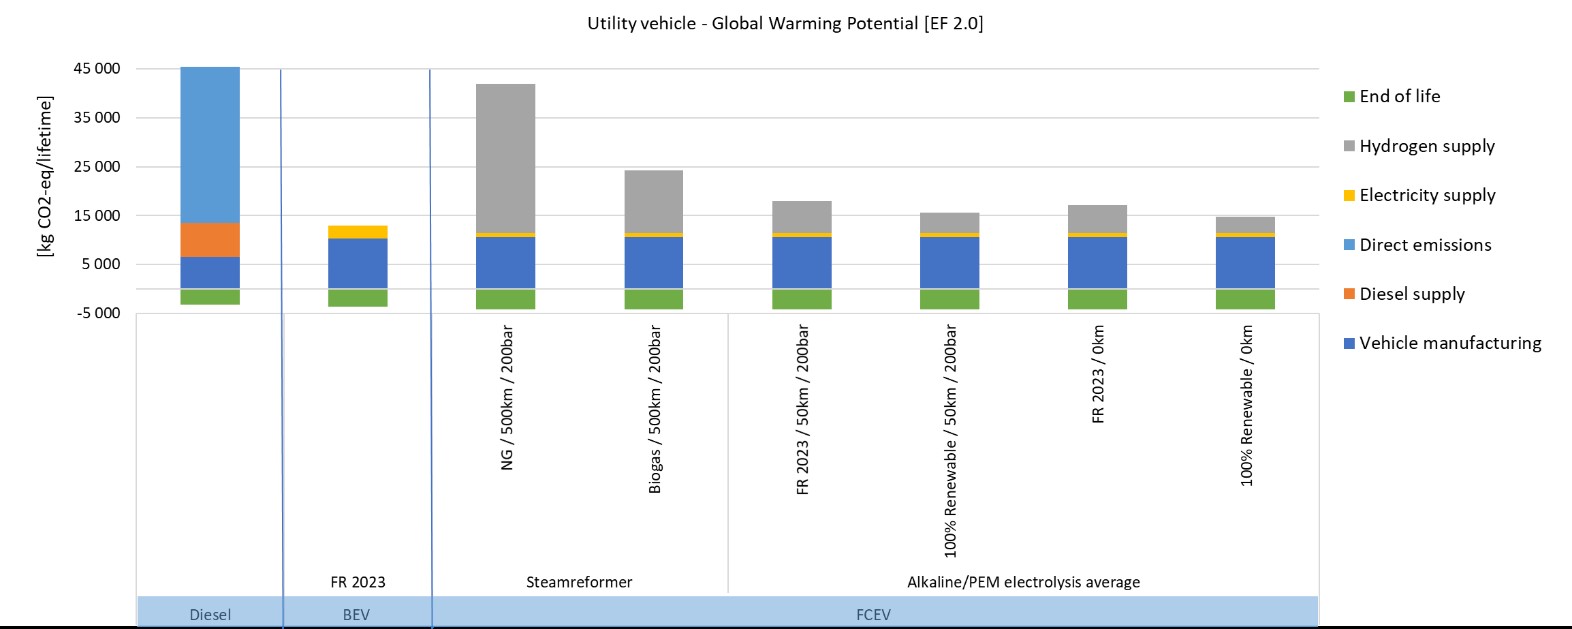 utility vehicle global warming potential 1